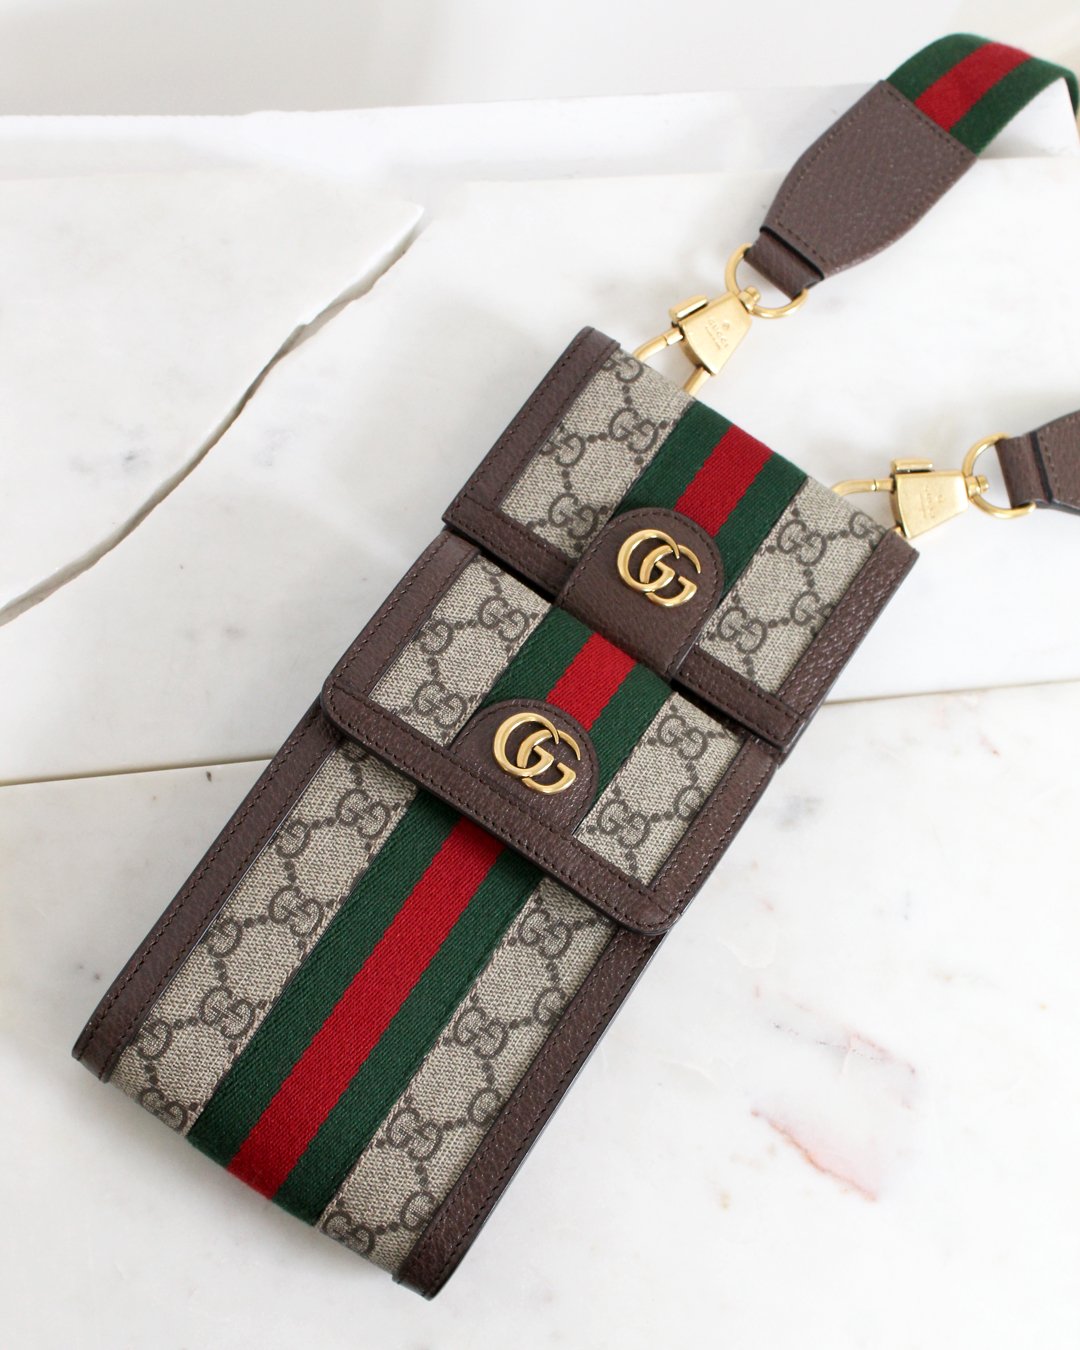 Gucci Ophidia Double Pouch Crossbody Bag — Otra Vez Couture Consignment